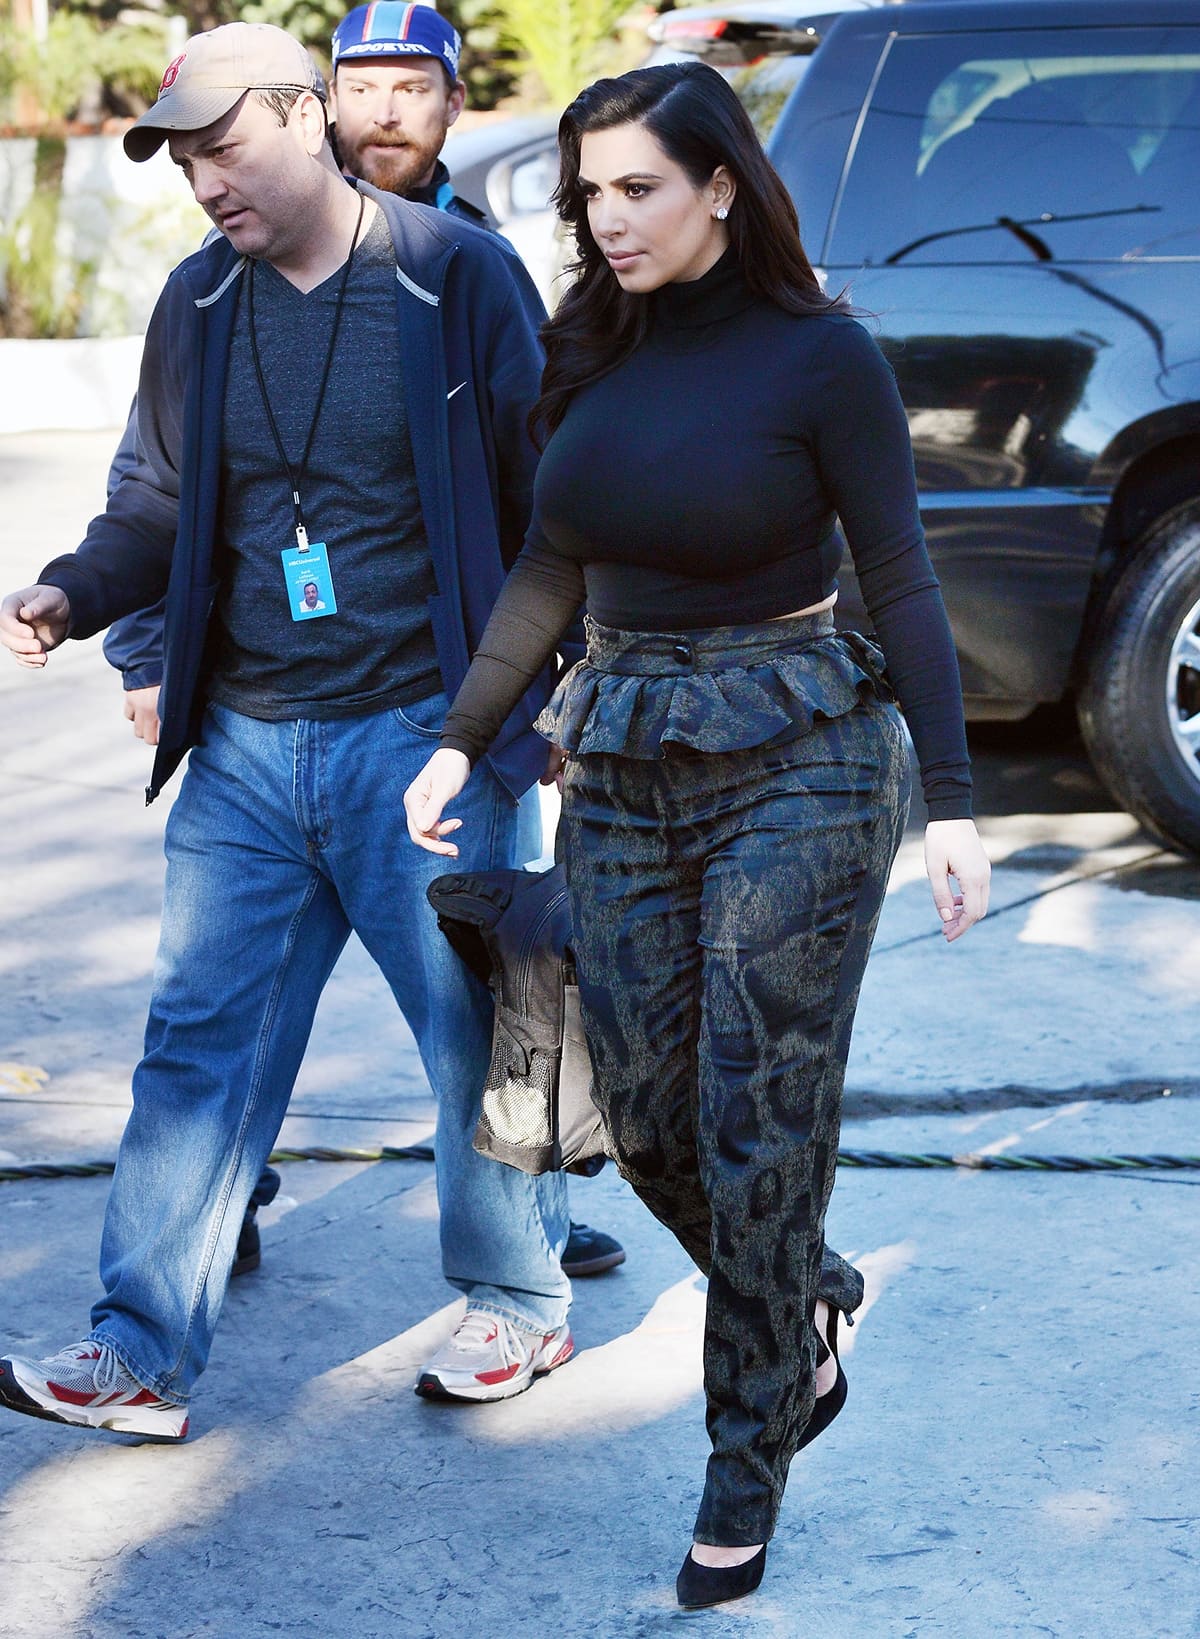 Kim Kardashian embraced her pregnancy with bold style, stepping out from her Beverly Hills home in snug, metallic sheen animal-print pants with a peplum ruffle, a tight cropped turtleneck, big diamond earrings, and black stiletto heels, highlighting her curvy figure